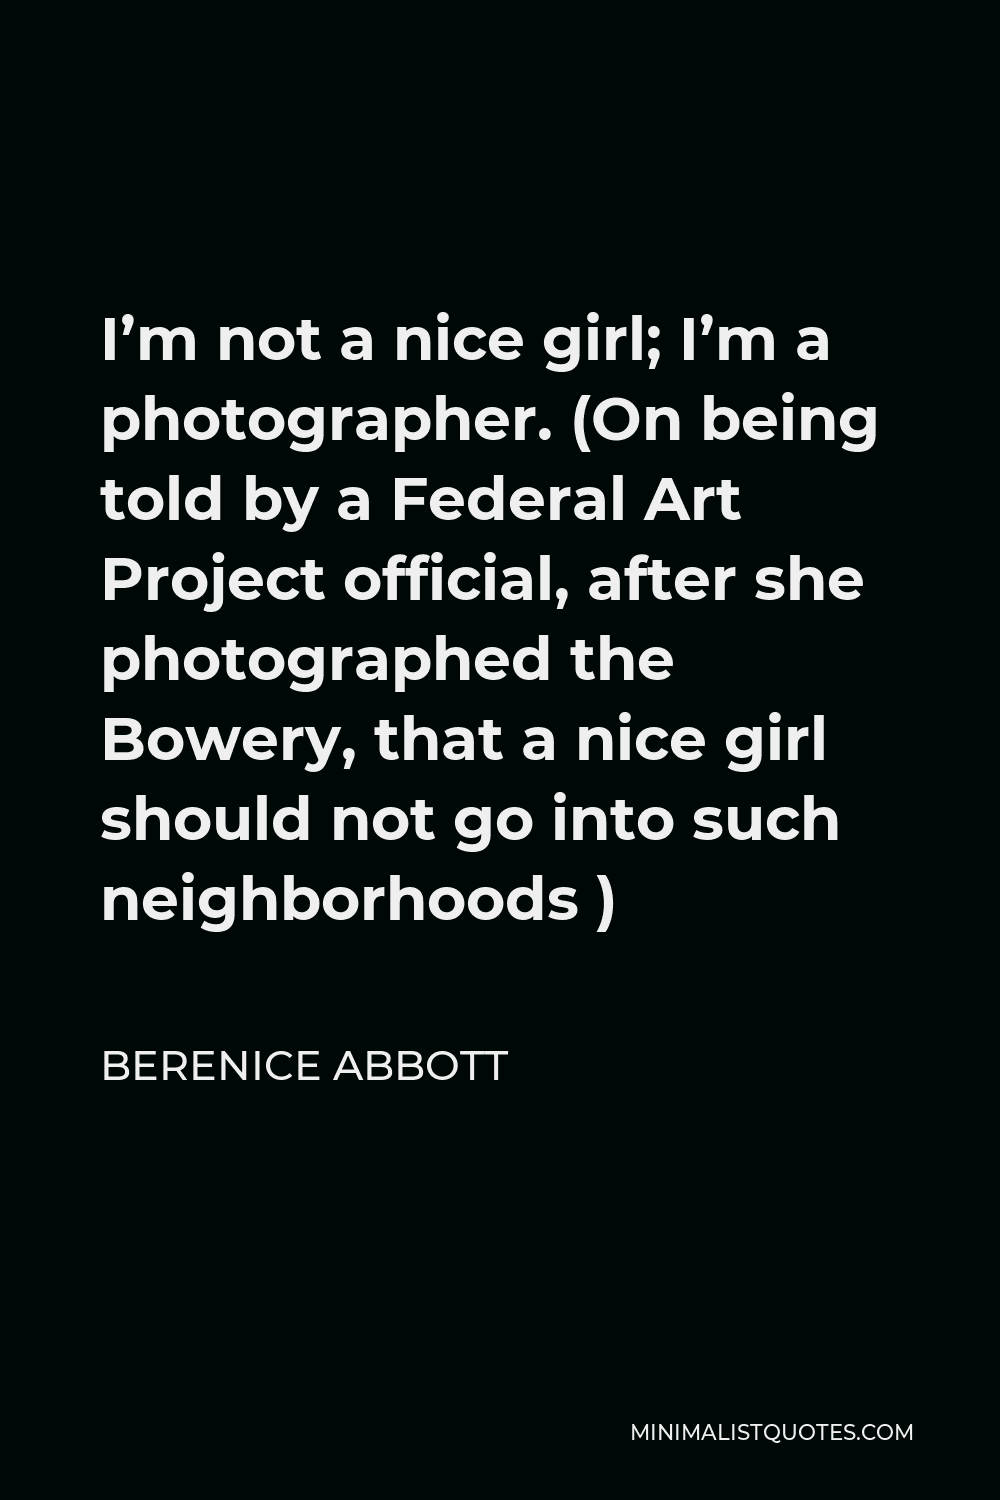 Berenice Abbott Quote - I’m not a nice girl; I’m a photographer. (On being told by a Federal Art Project official, after she photographed the Bowery, that a nice girl should not go into such neighborhoods )